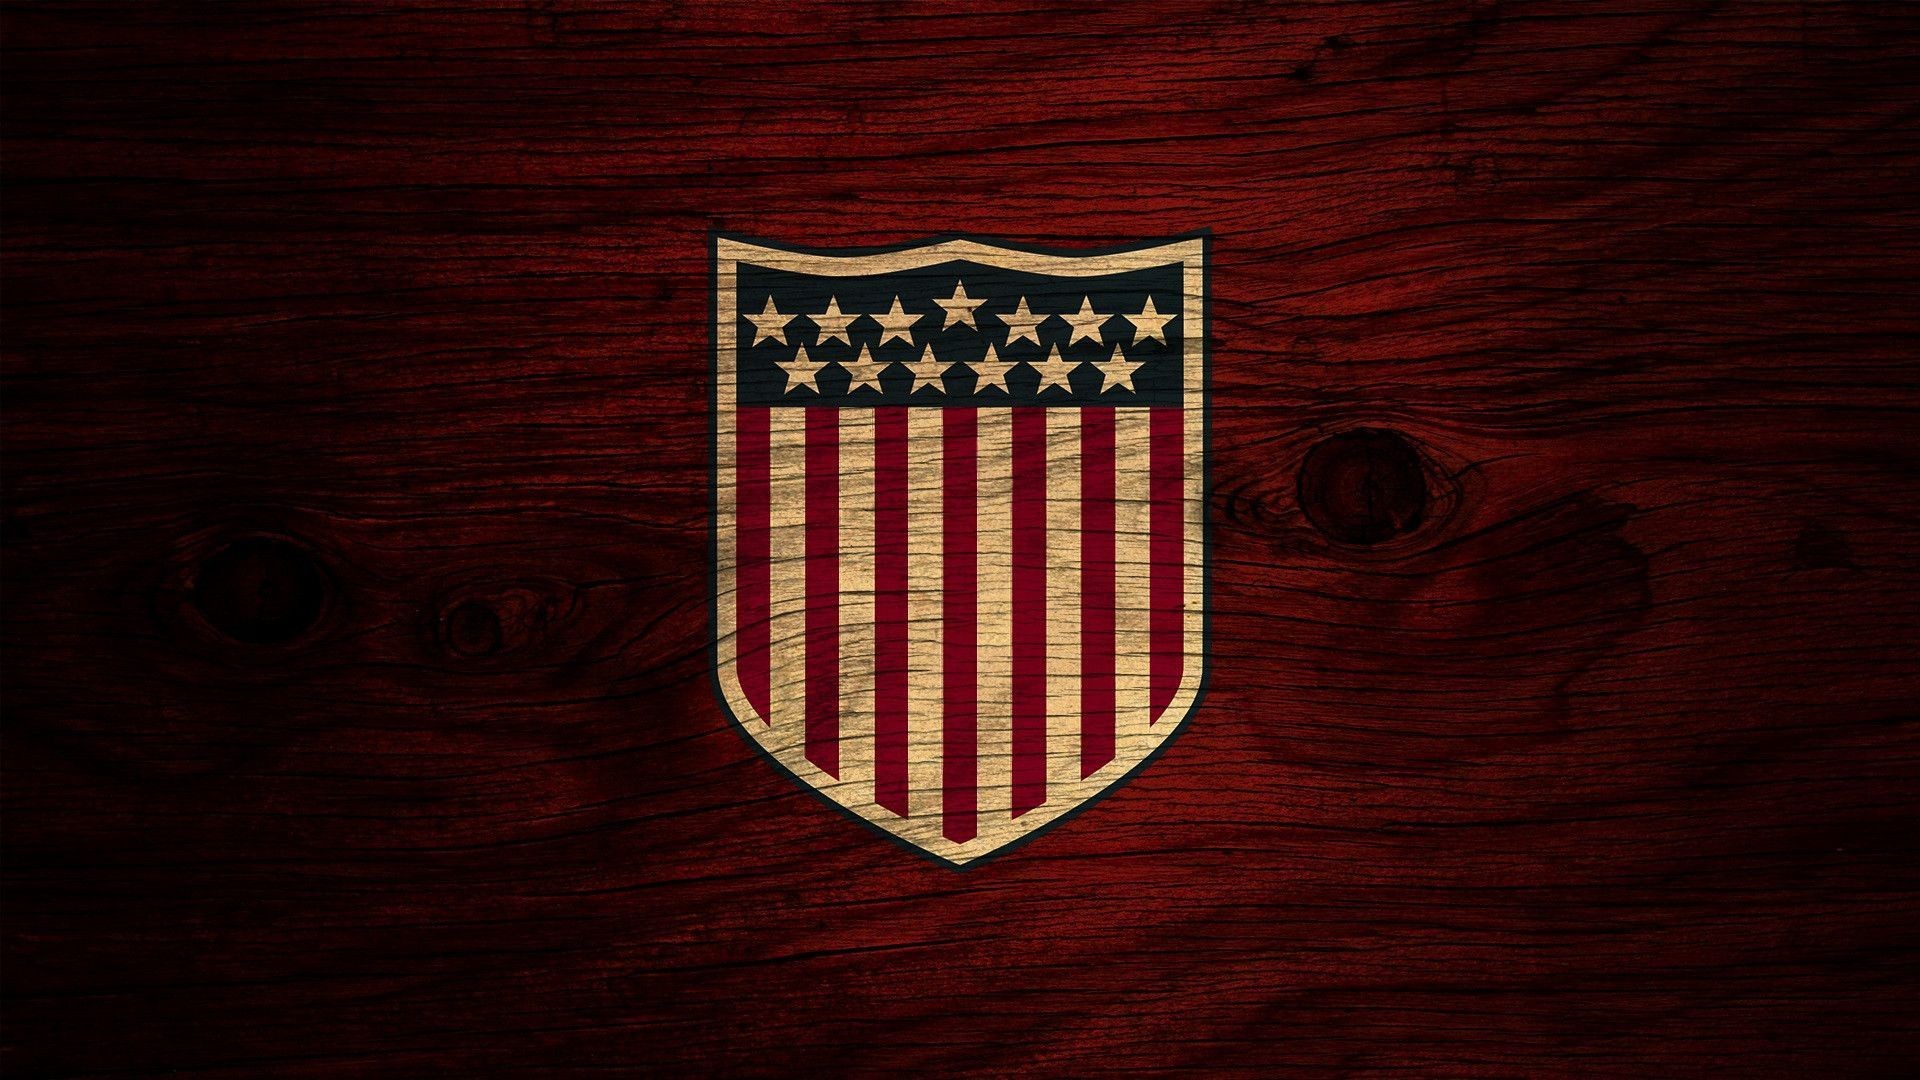 1920x1080 HD Images Collection of USA Soccer: 6617486 by Lizette Bridger - HD  Wallpapers